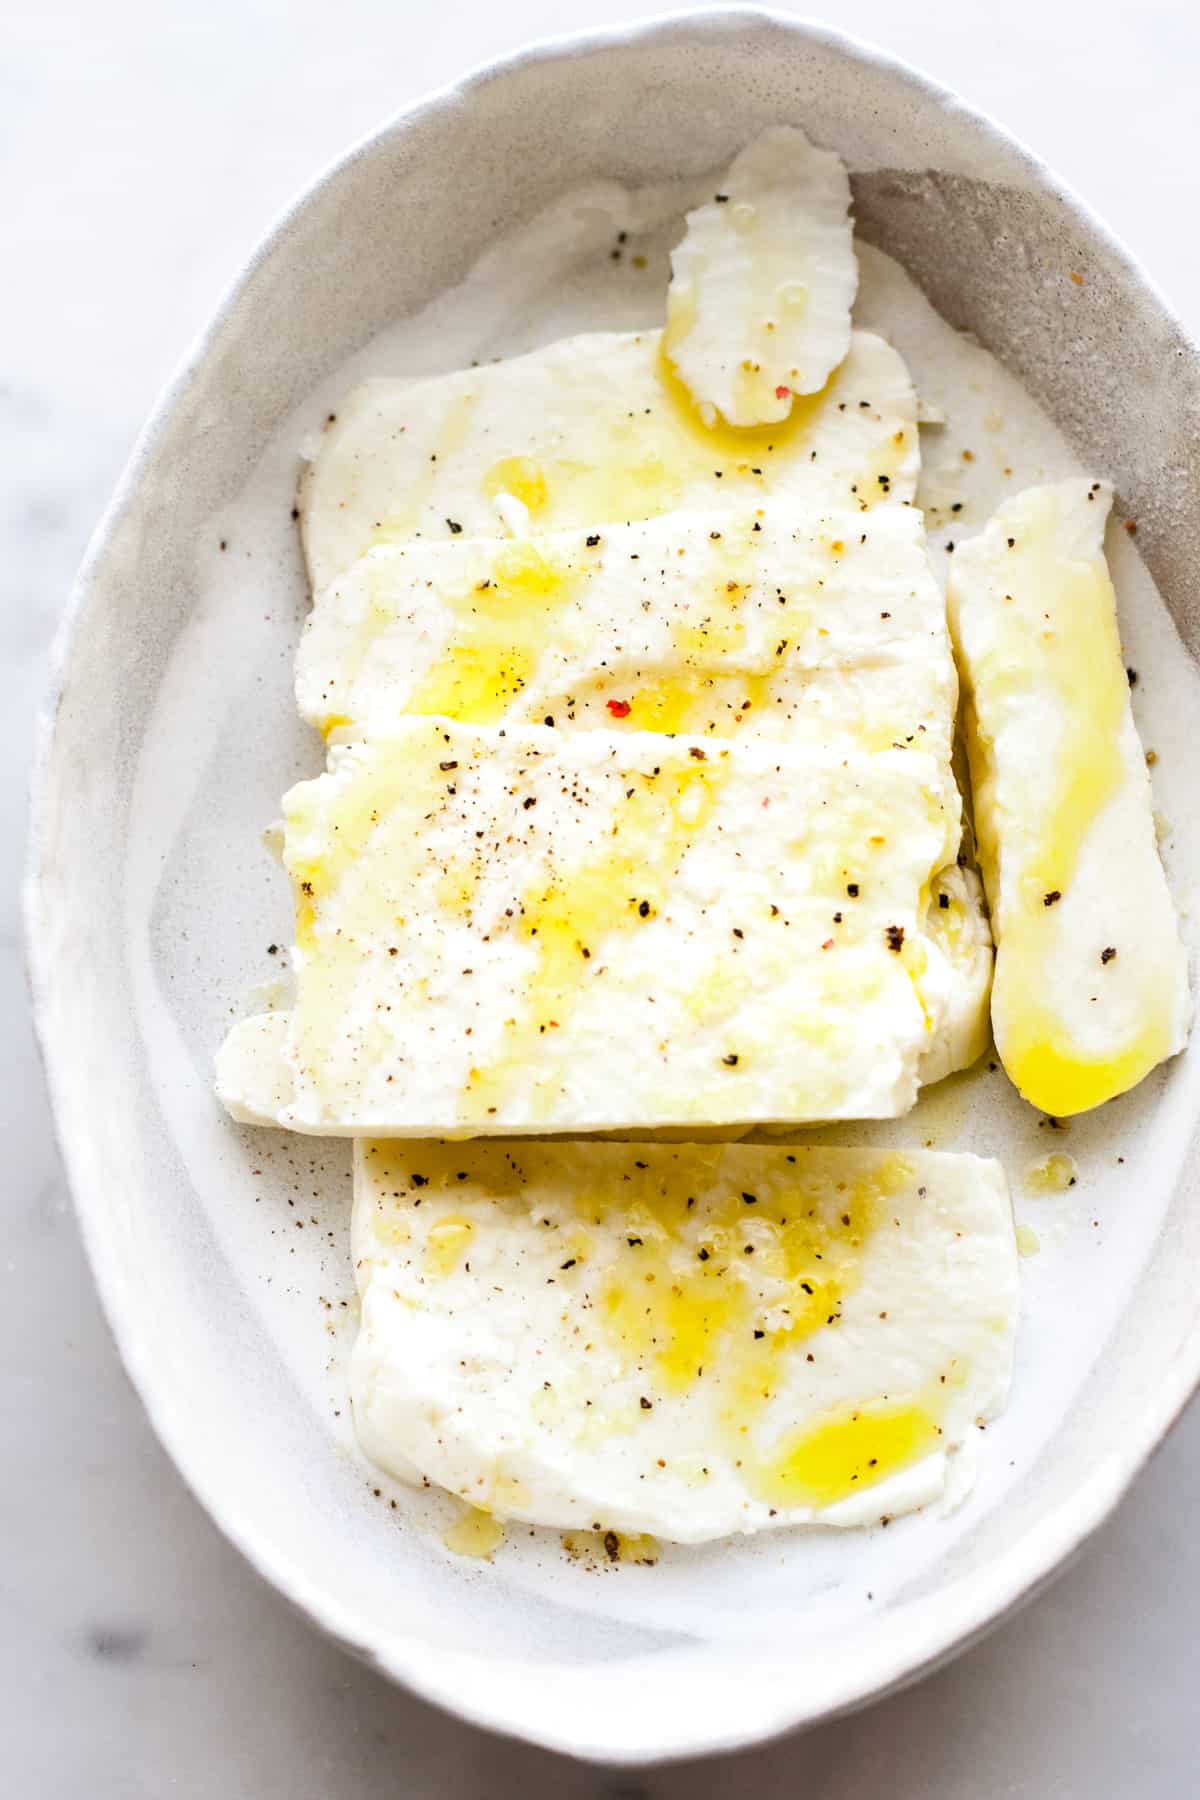 sliced cheese with a drizzle of olive oil